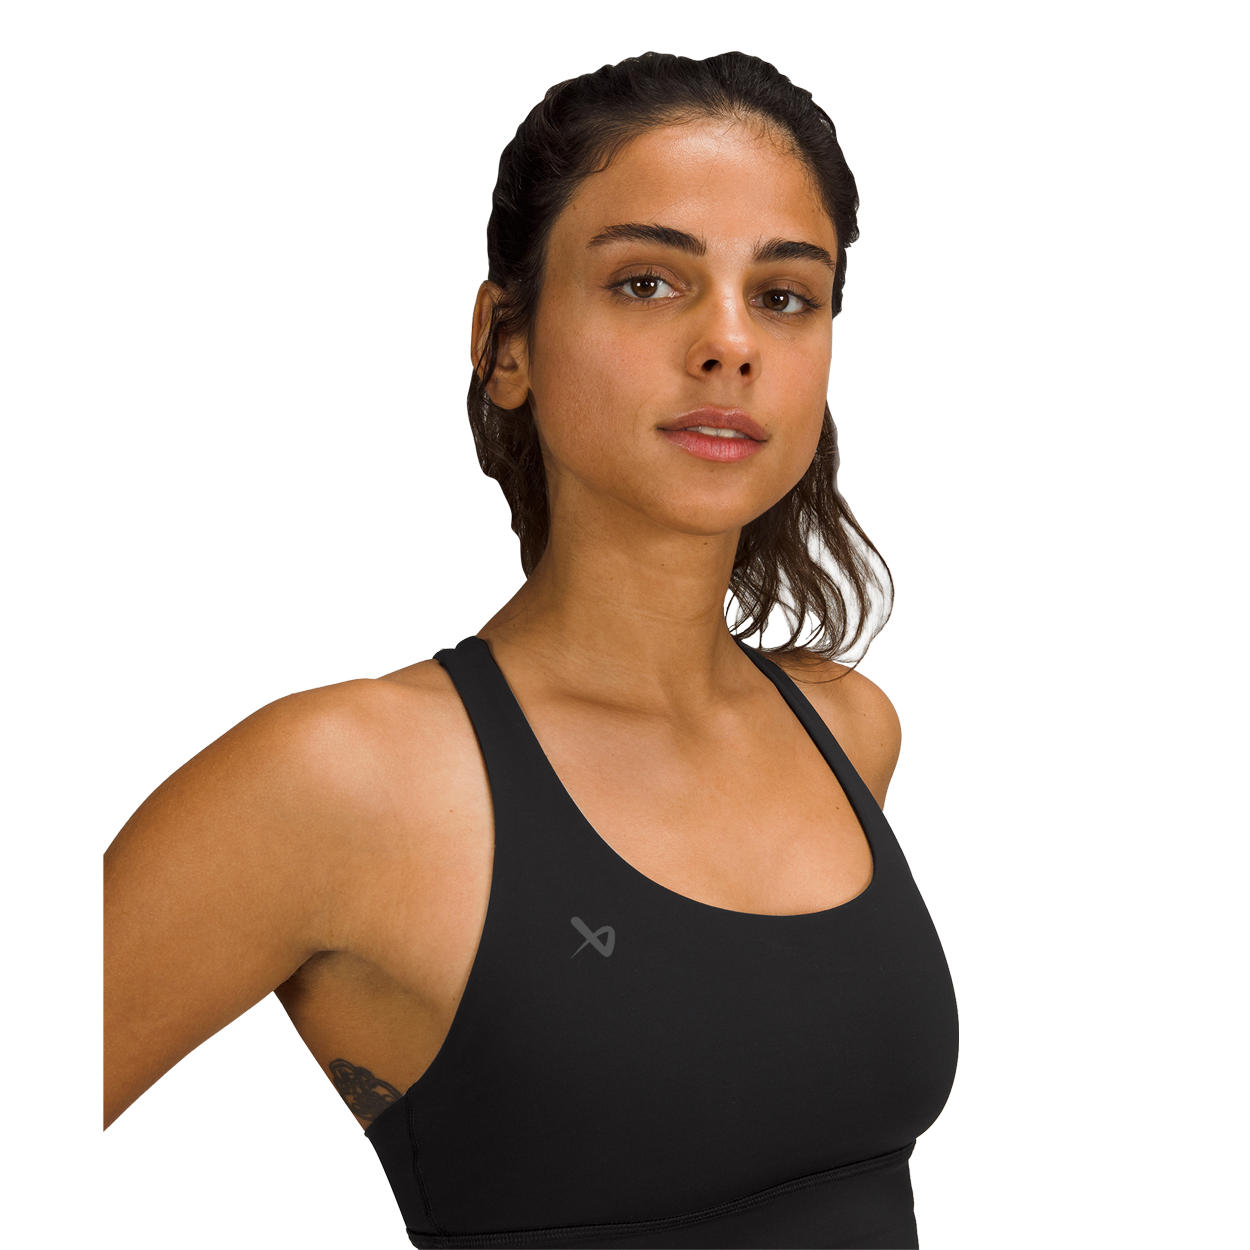 Strength Reversible Sports Bra - Black and Watermelon – Beckons Inspired  Clothing